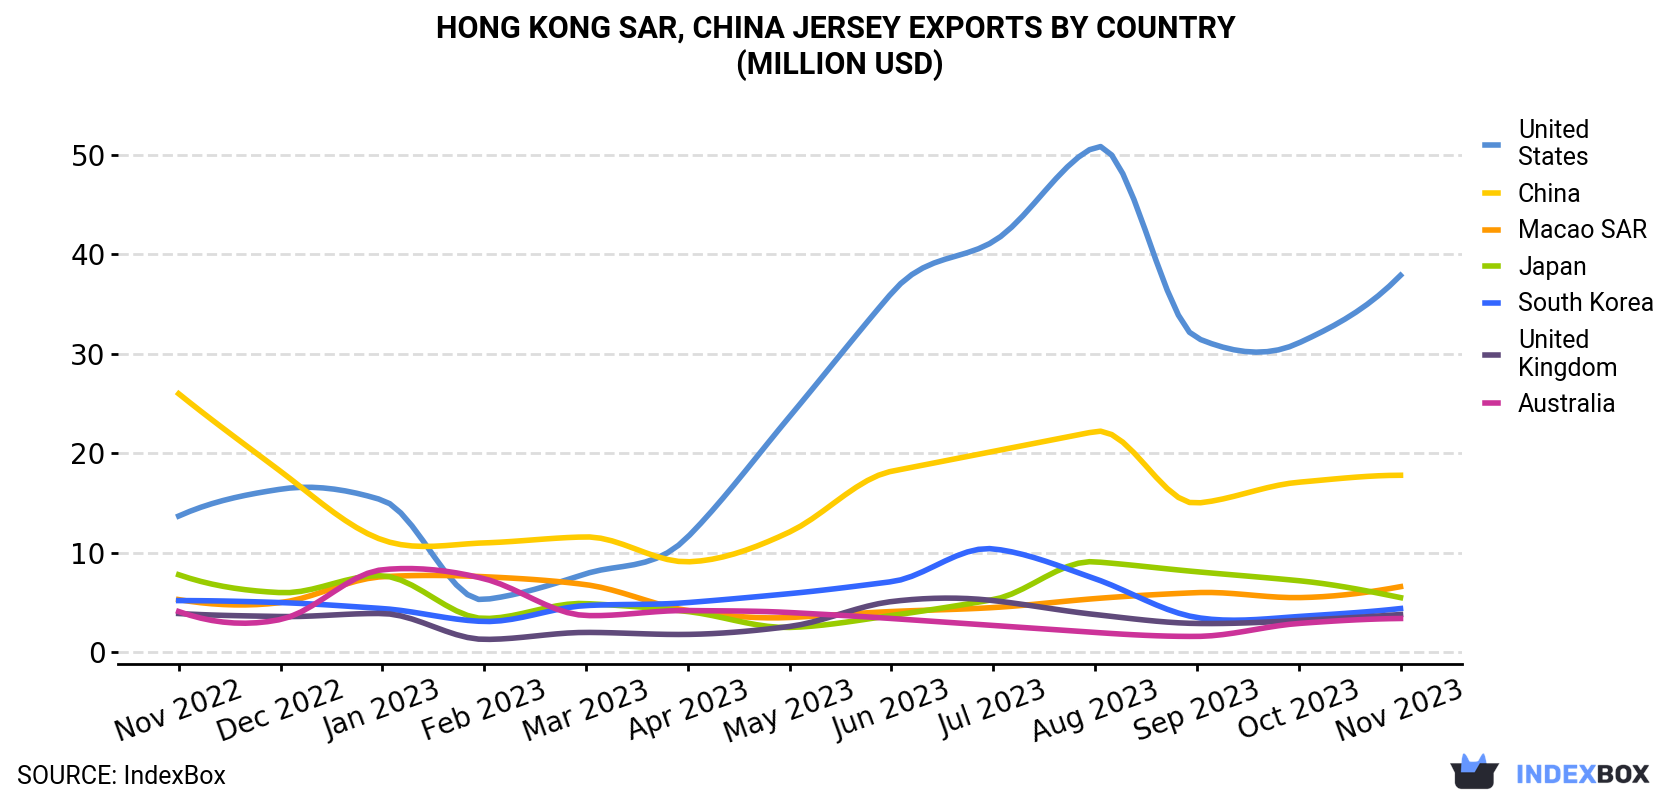 Hong Kong Jersey Exports By Country (Million USD)